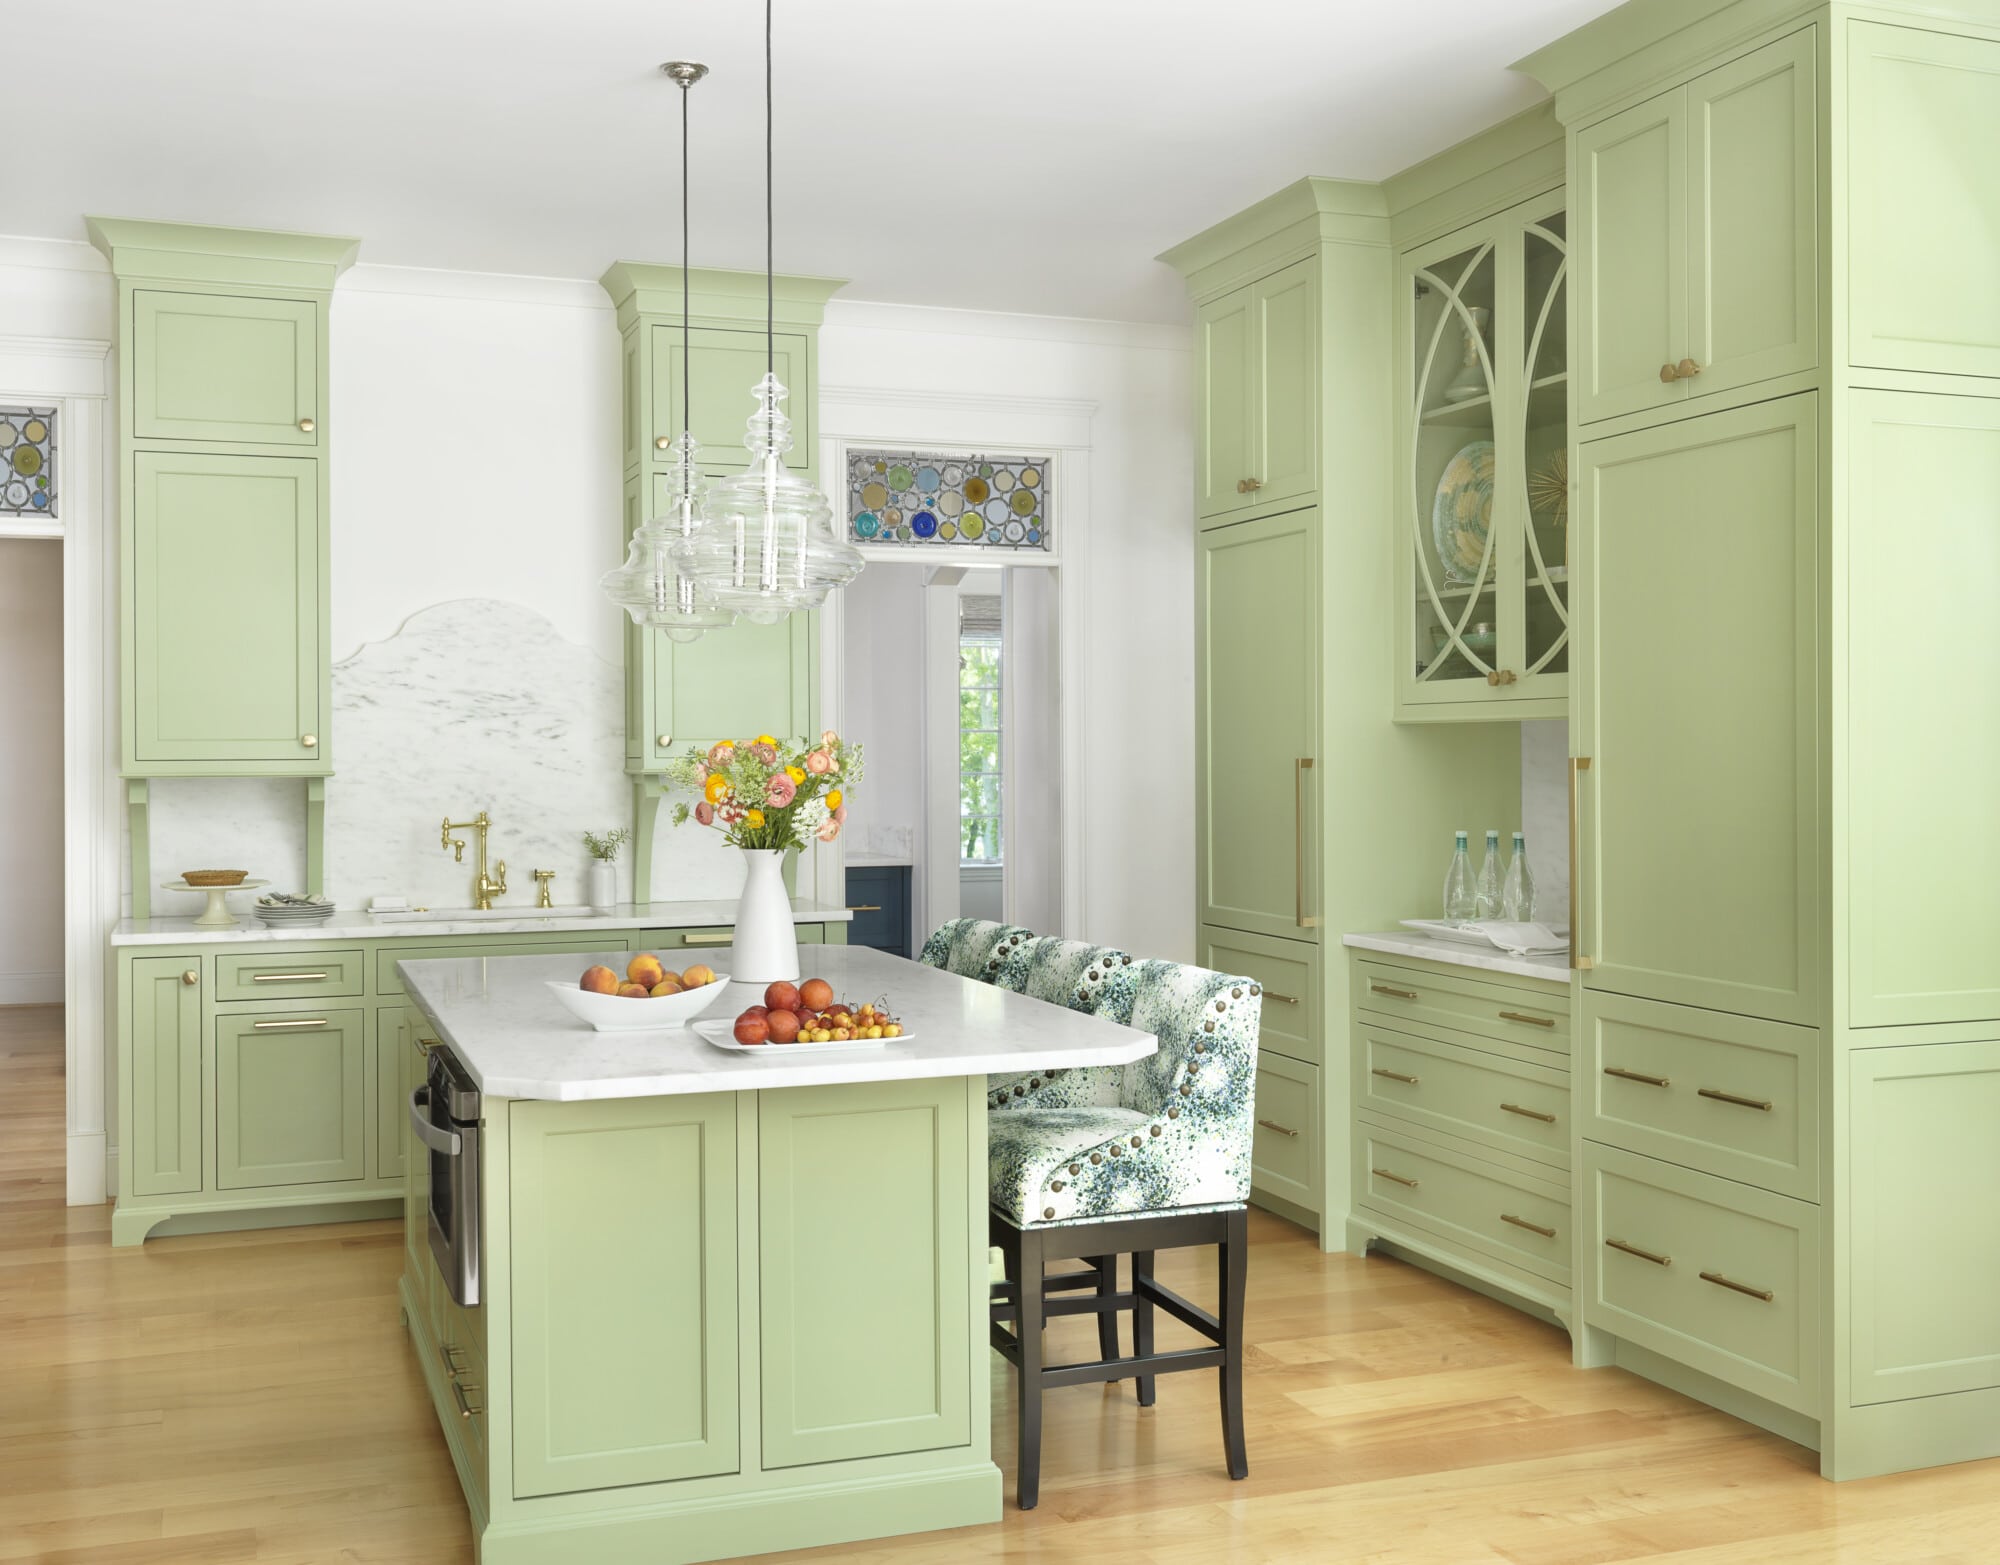 Amy Studebaker Design | Alise O'Brien Photography green and white kitchen